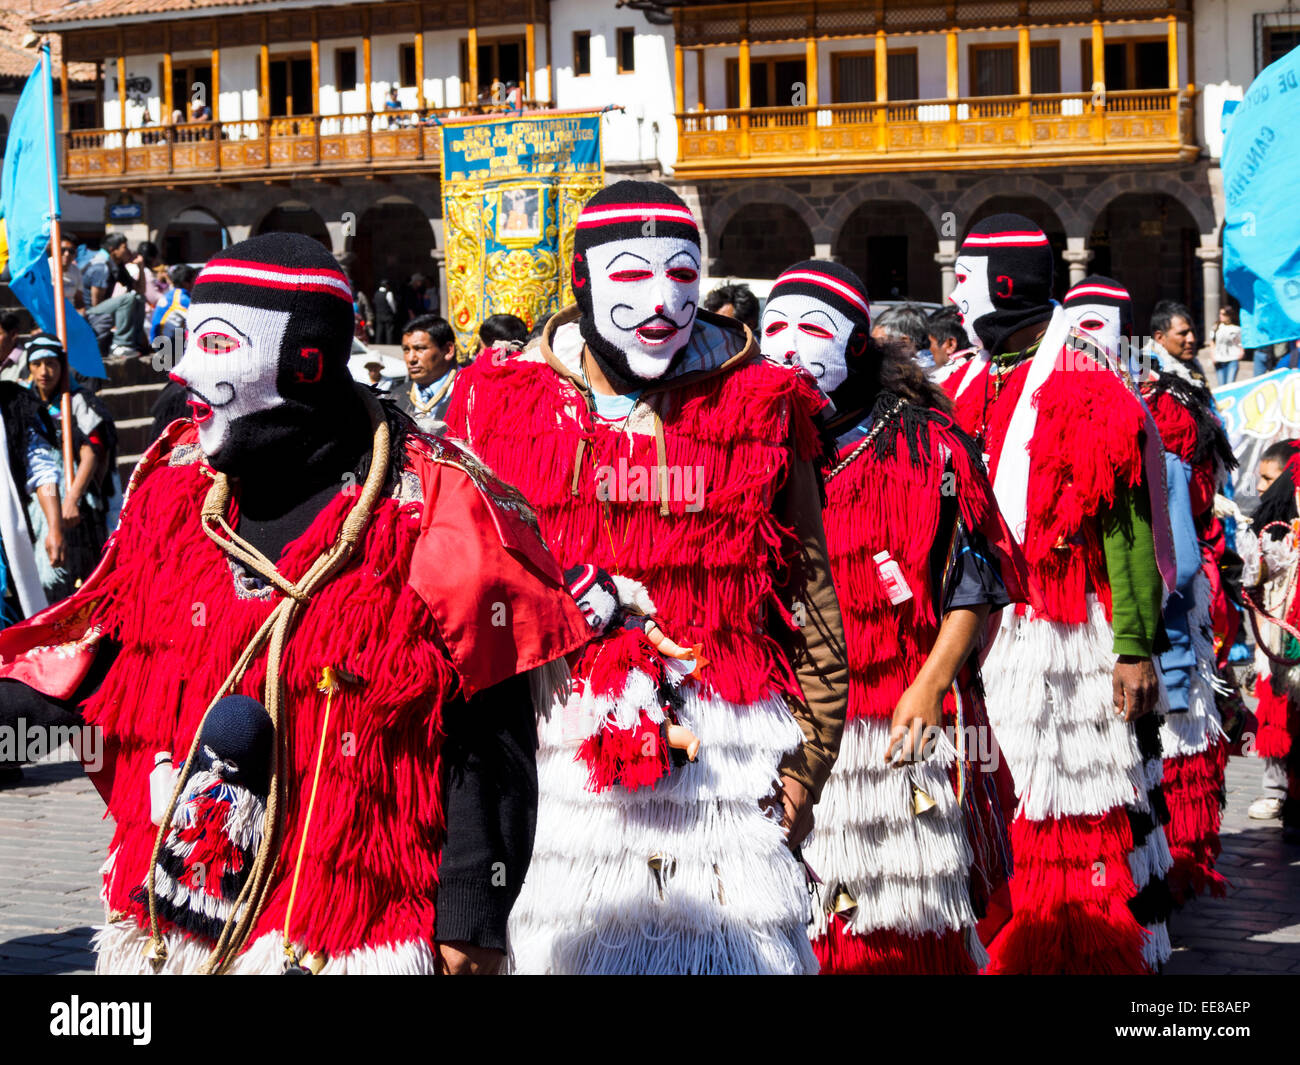 People from all regions gather to Cusco for the Qoyllority (or Qoyllur Rit'i) pilgrimage to the mountain sanctuary of Sinakara - Cusco, Peru Stock Photo